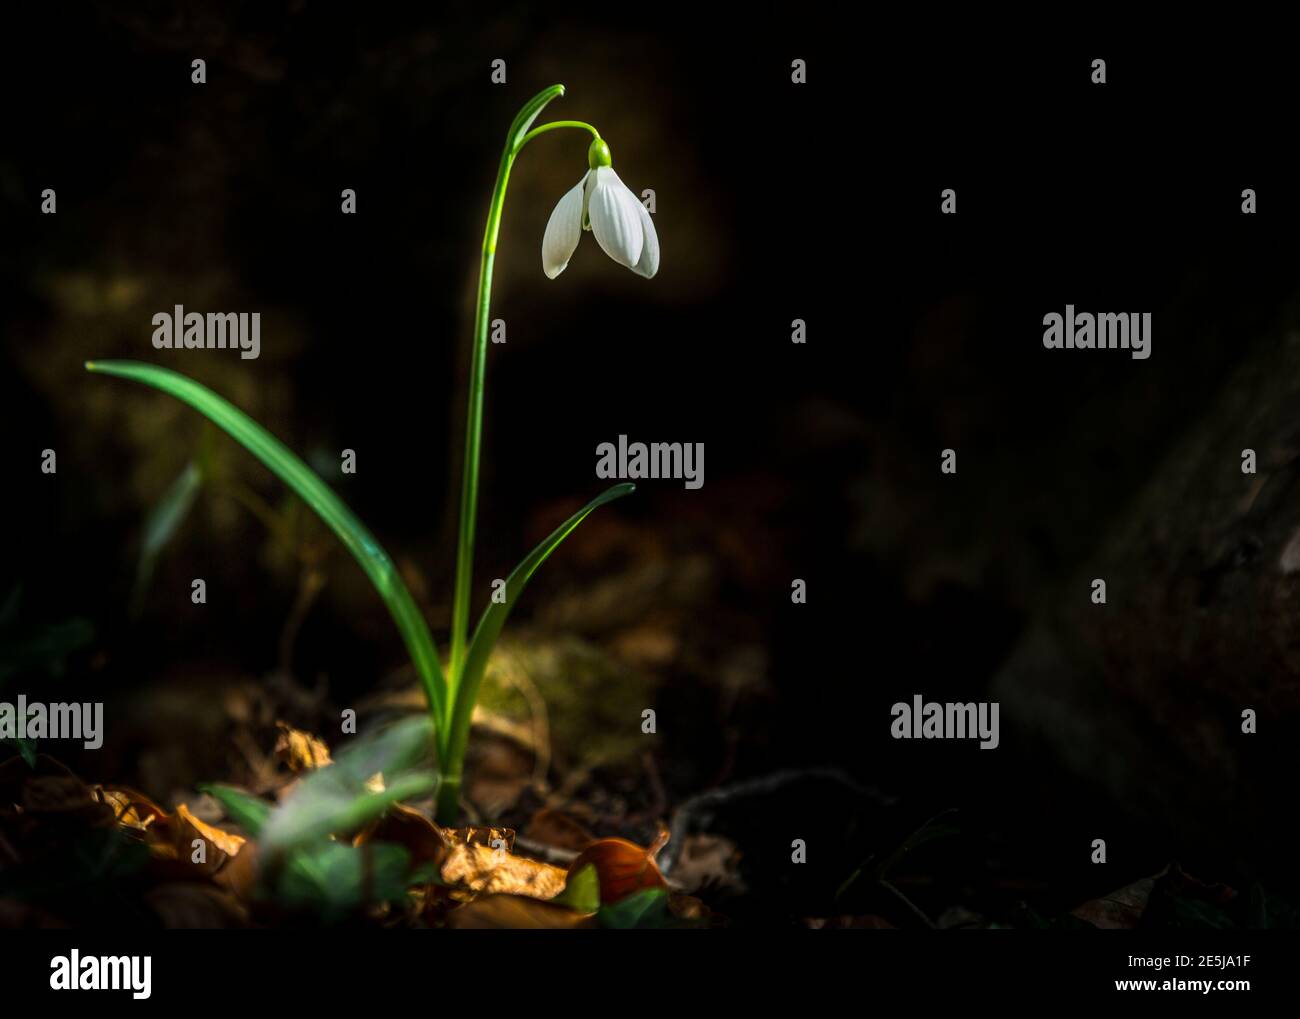 Amaryllidaceae - Galanthus nivalis L. - snowdrop flower on black background with copyspace Stock Photo